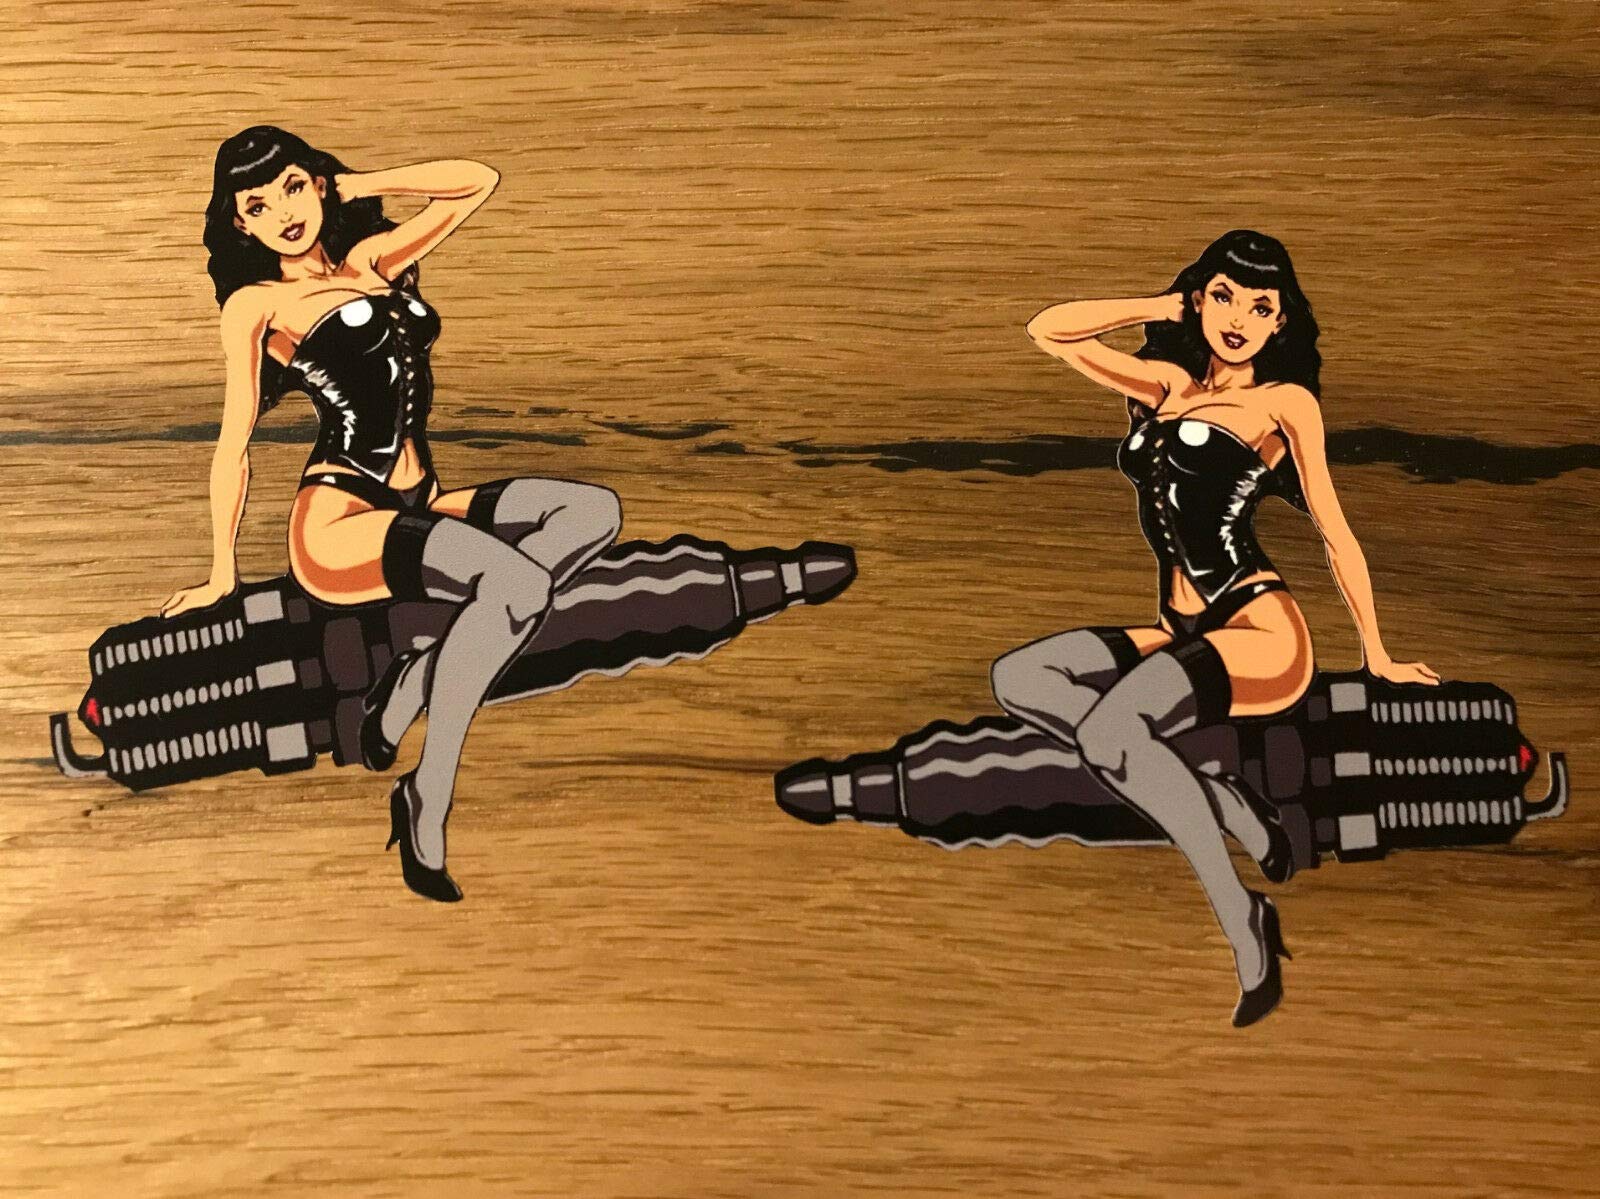 24/7stickers #433 / 2X Pinup Aufkleber je 10x10cm Bombe Old School Hot Rod Tuning Vintage Retro Pin Up Girl von 24/7stickers